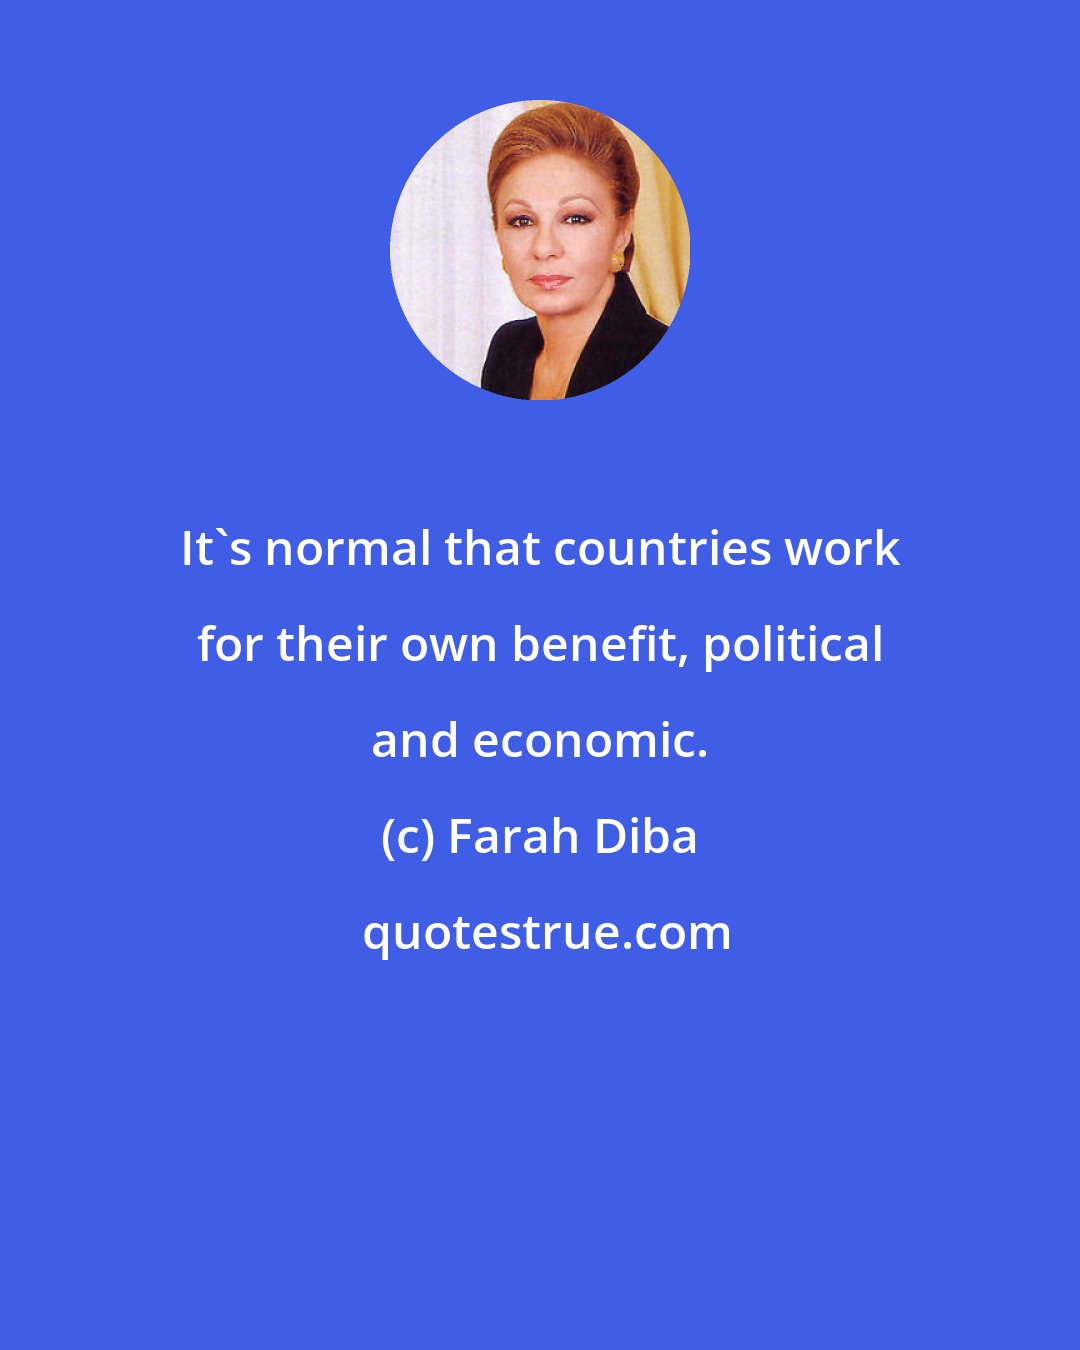 Farah Diba: It's normal that countries work for their own benefit, political and economic.